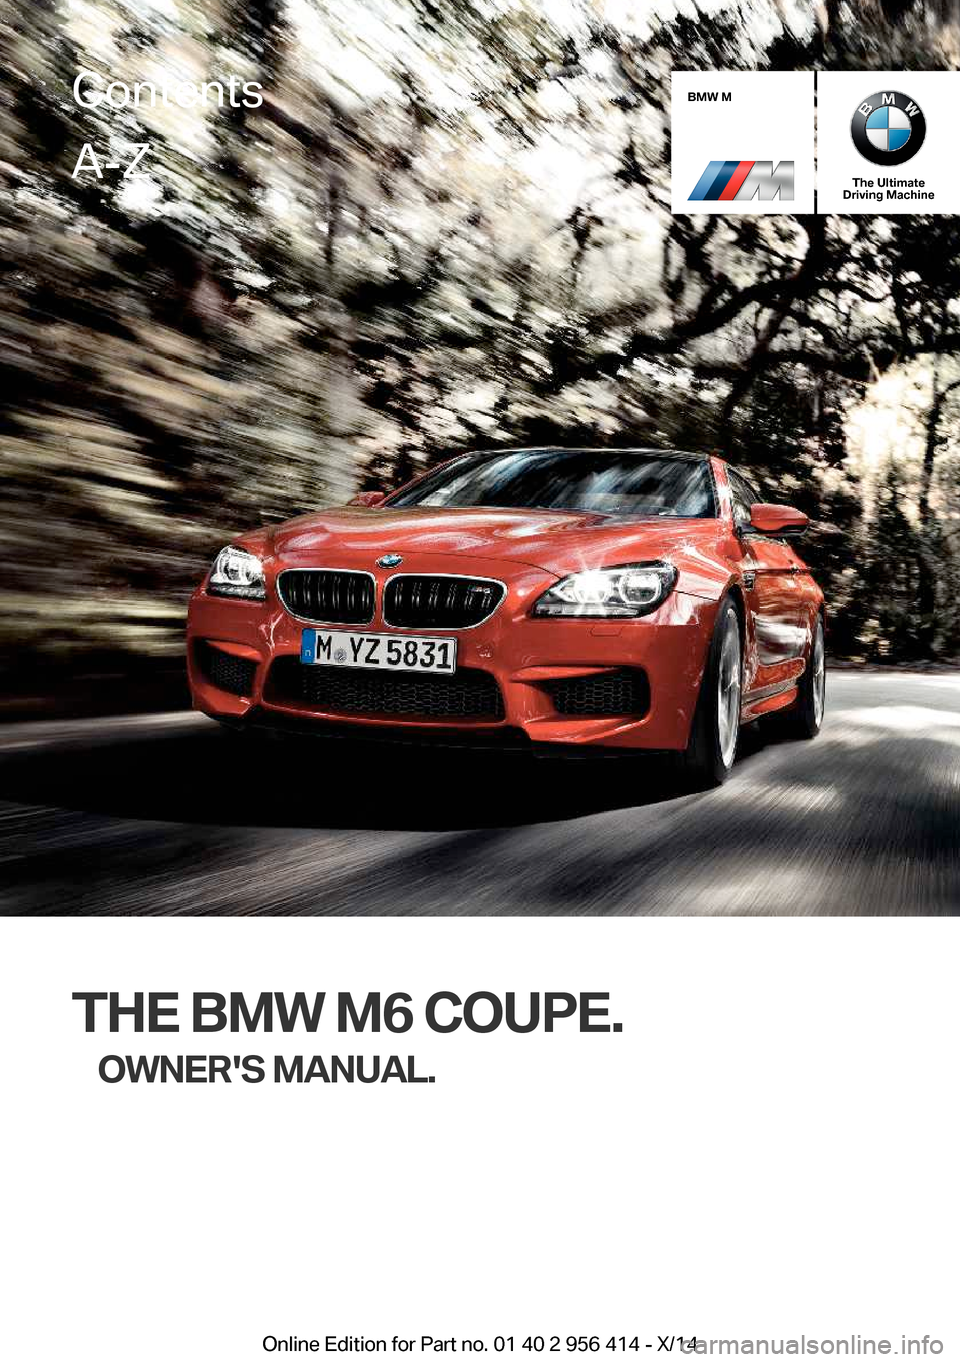 BMW M6 COUPE 2014 F13M Owners Manual BMW M
The Ultimate
Driving Machine
THE BMW M6 COUPE.
OWNERS MANUAL.
ContentsA-Z
Online Edition for Part no. 01 40 2 956 414 - X/14   